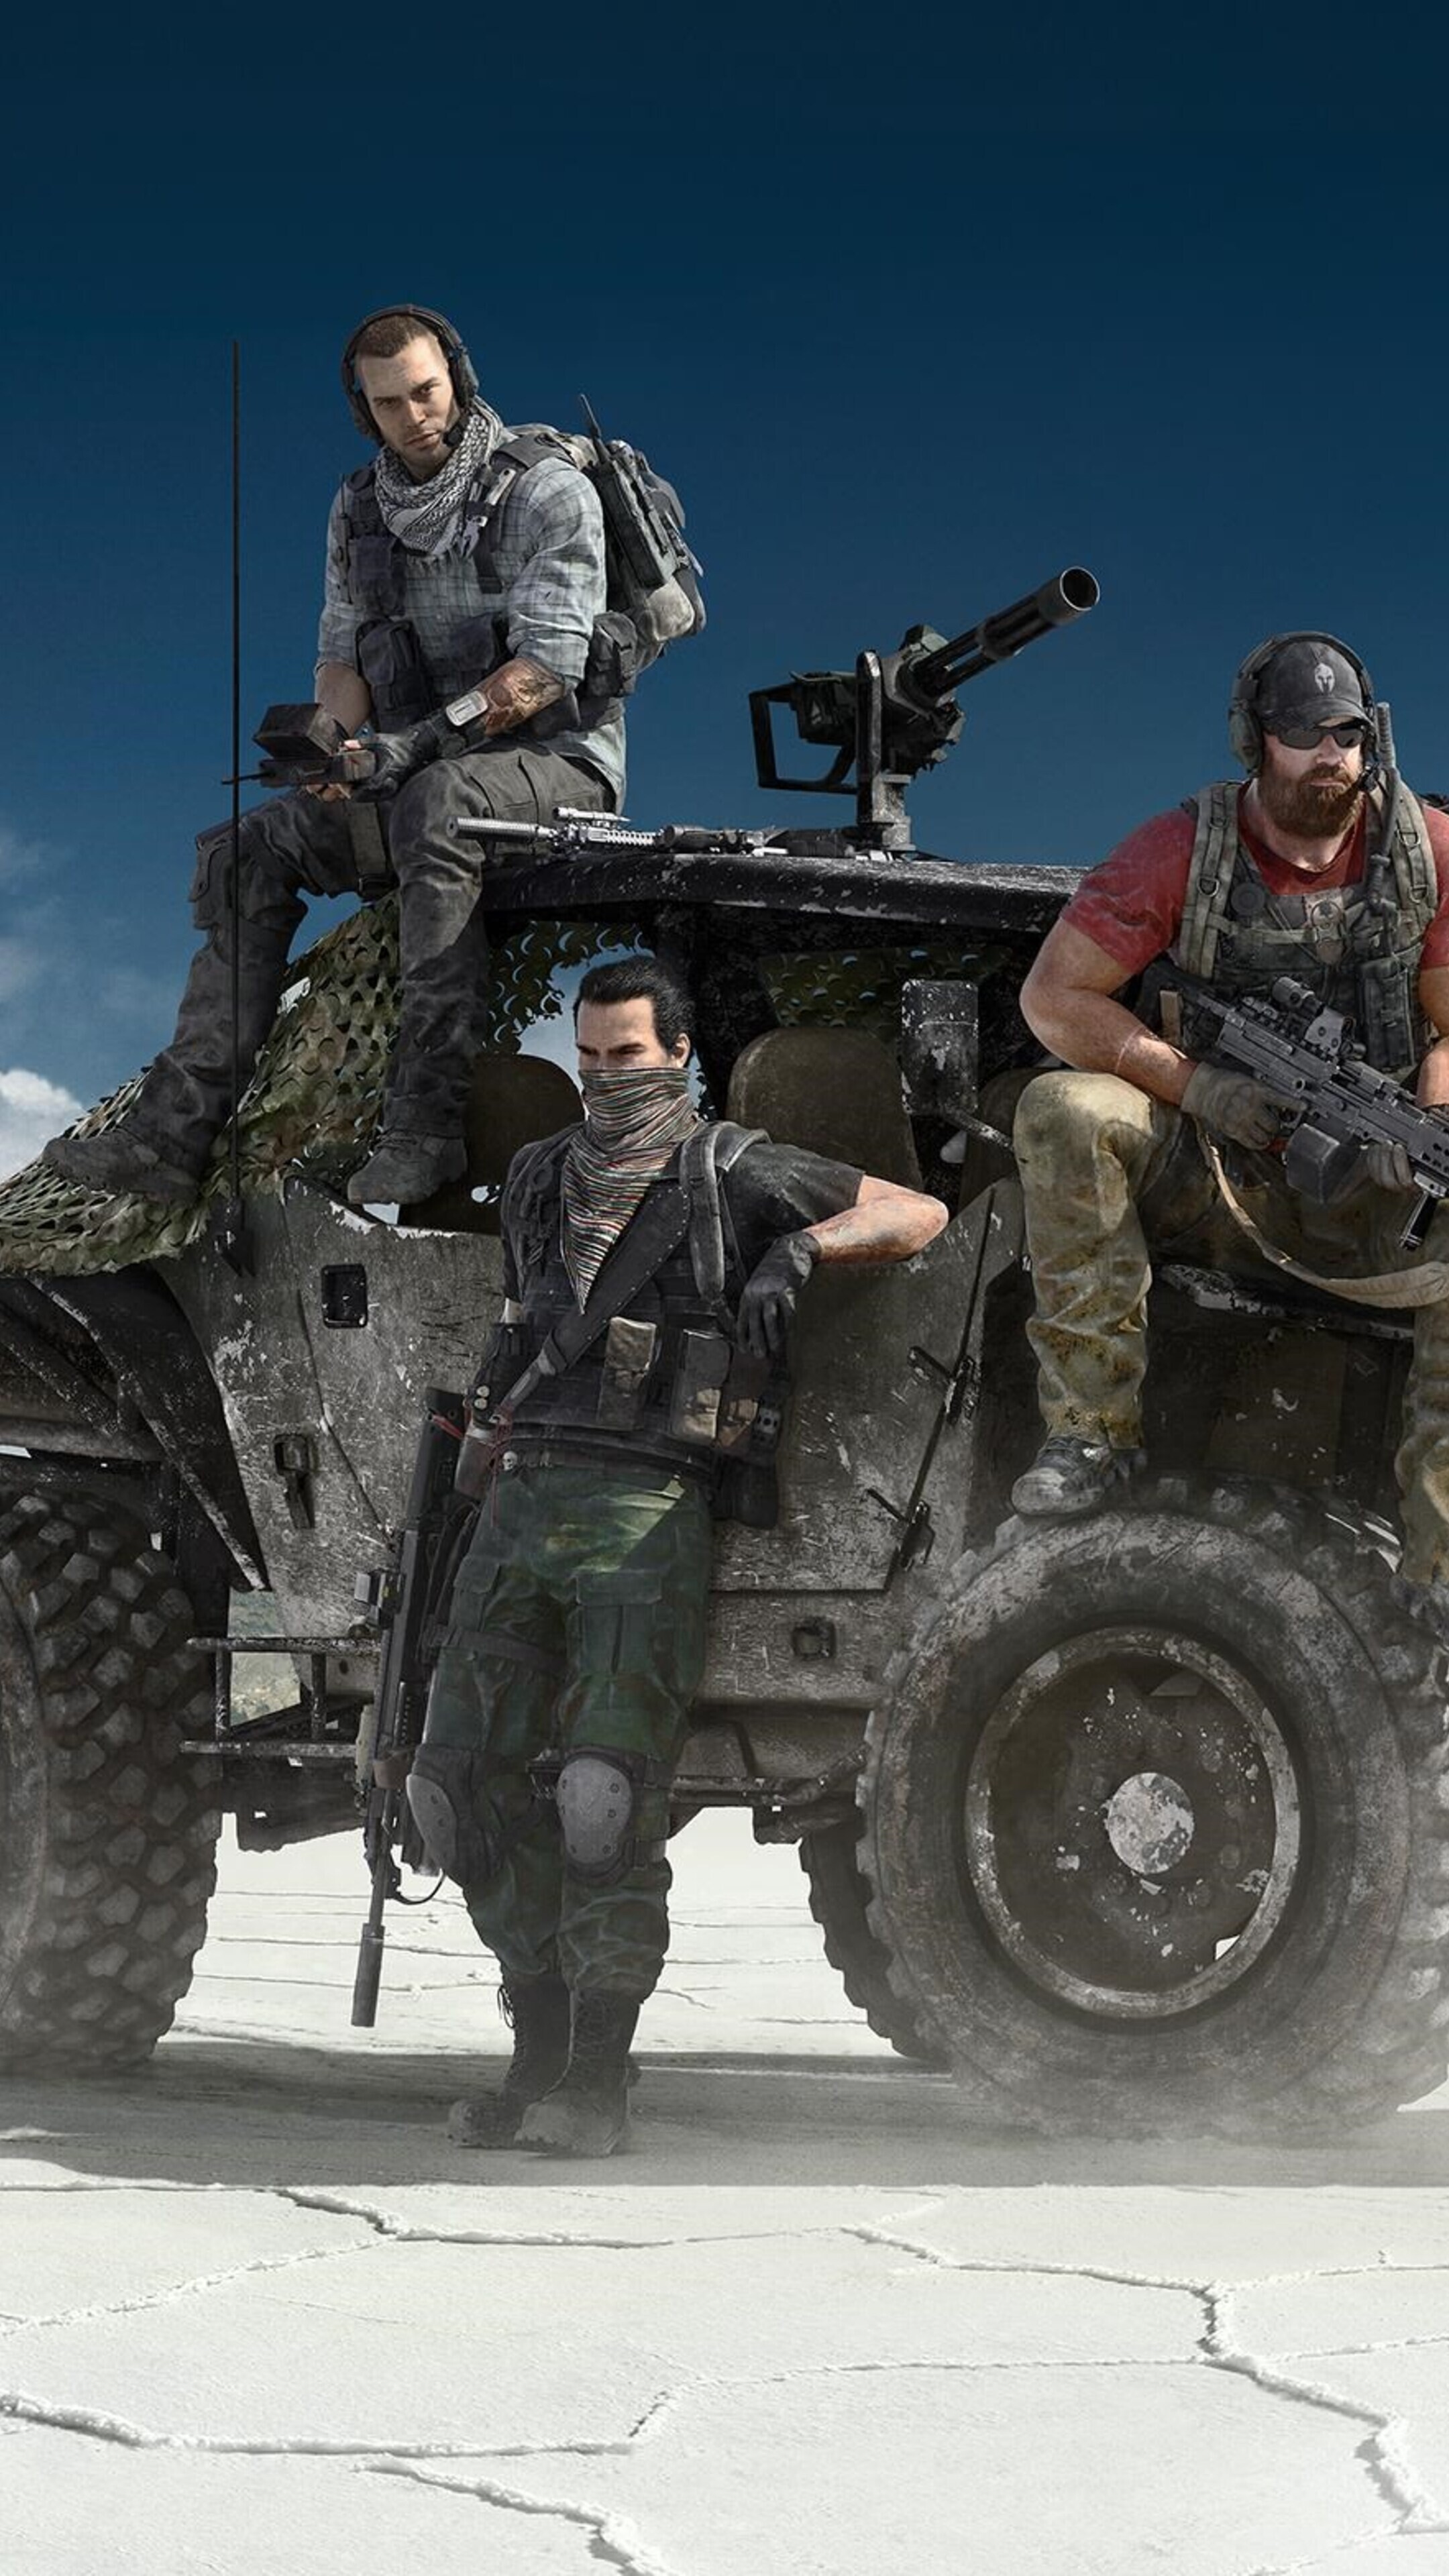 Ghost Recon: Wildlands: Nomad, Midas, and Holt, The leader with his squad members, Tom Clancy's game series. 2160x3840 4K Background.